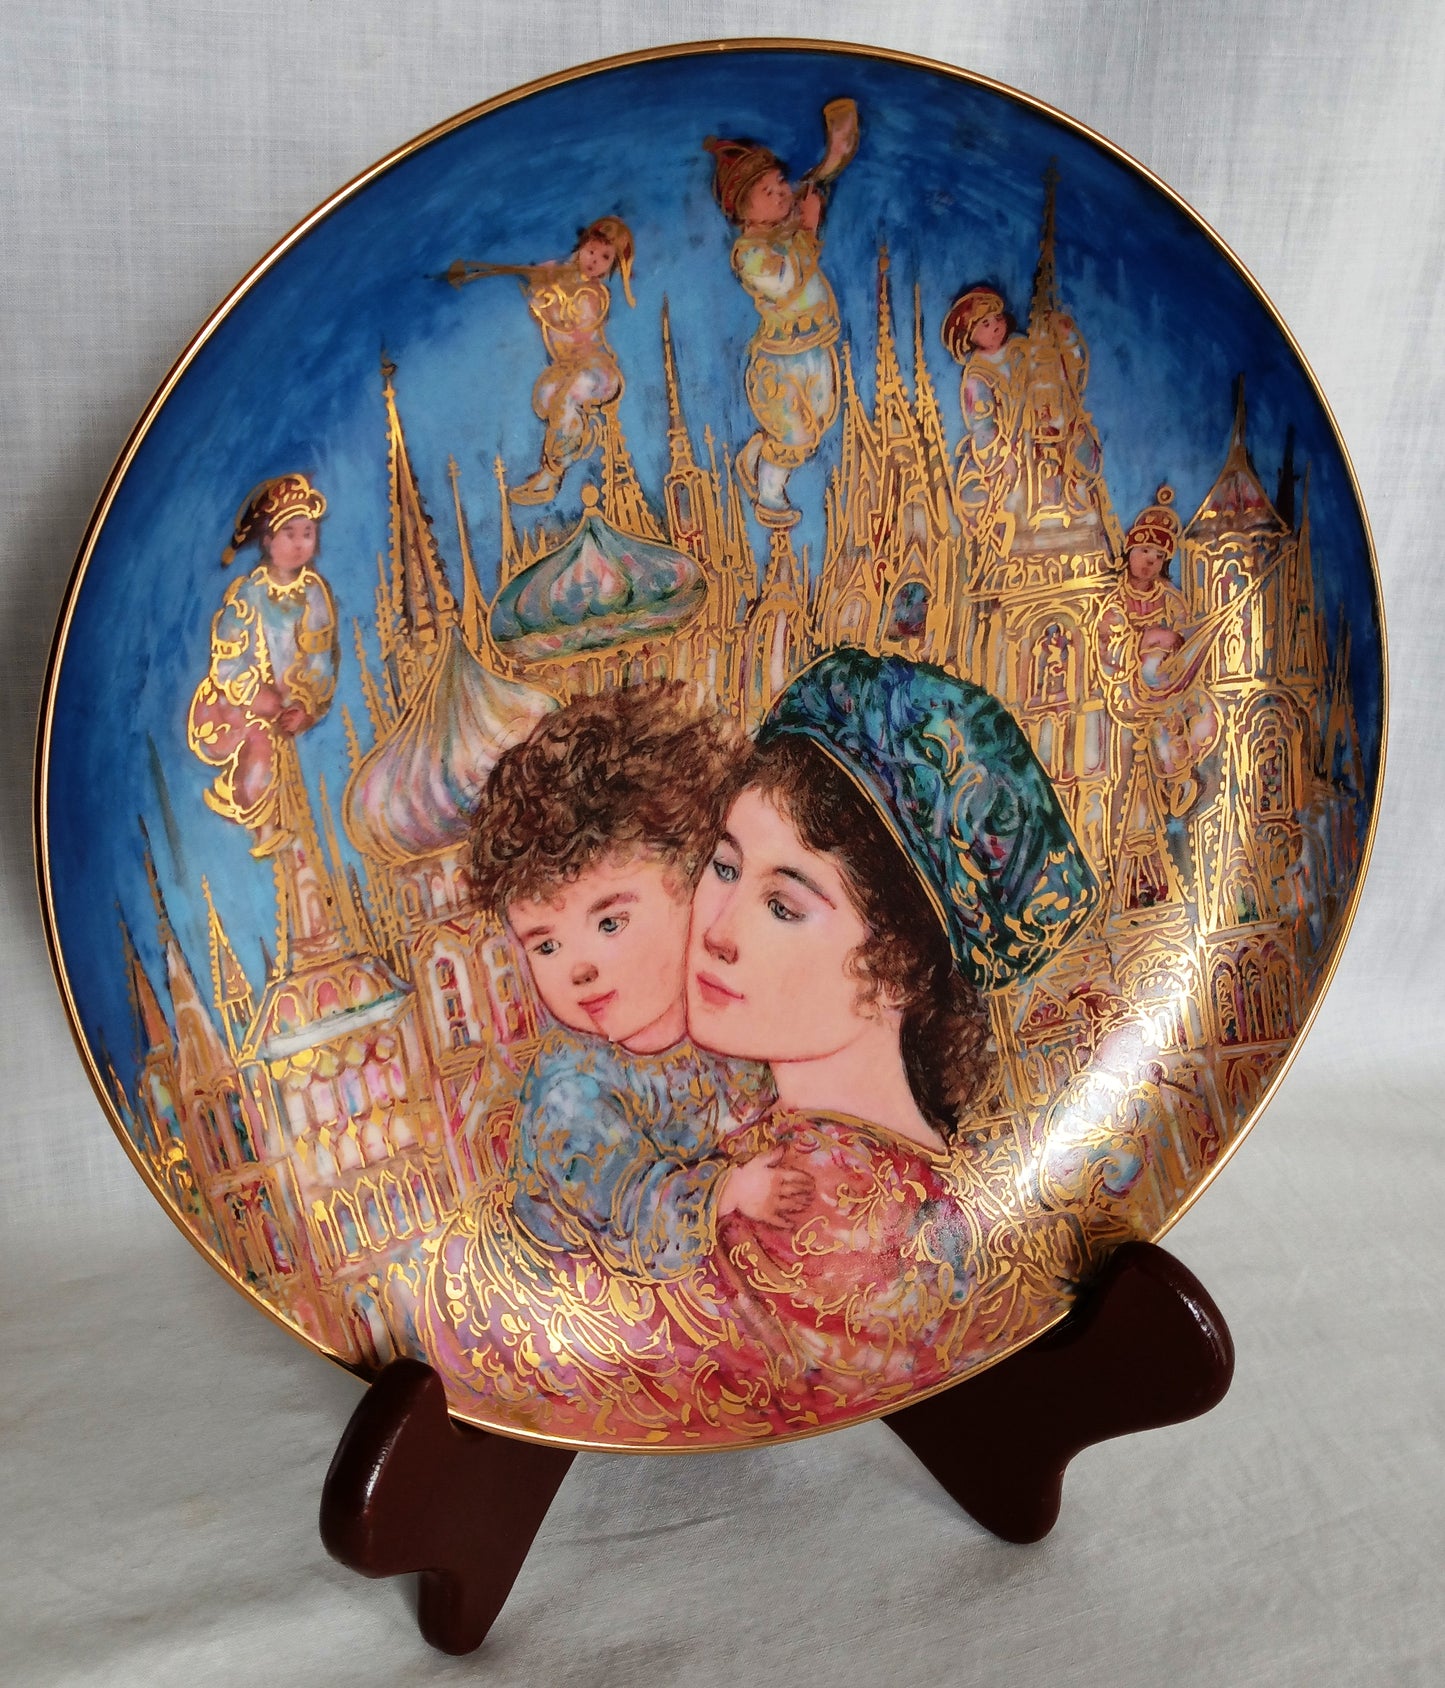 EDNA HIBEL Fine Art Collector Plate HOLIDAY JOY Christmas 1993 Mother & Child Porcelain Gilt Third Edition Plate w/Wooden Stand-Signed Mint Condition